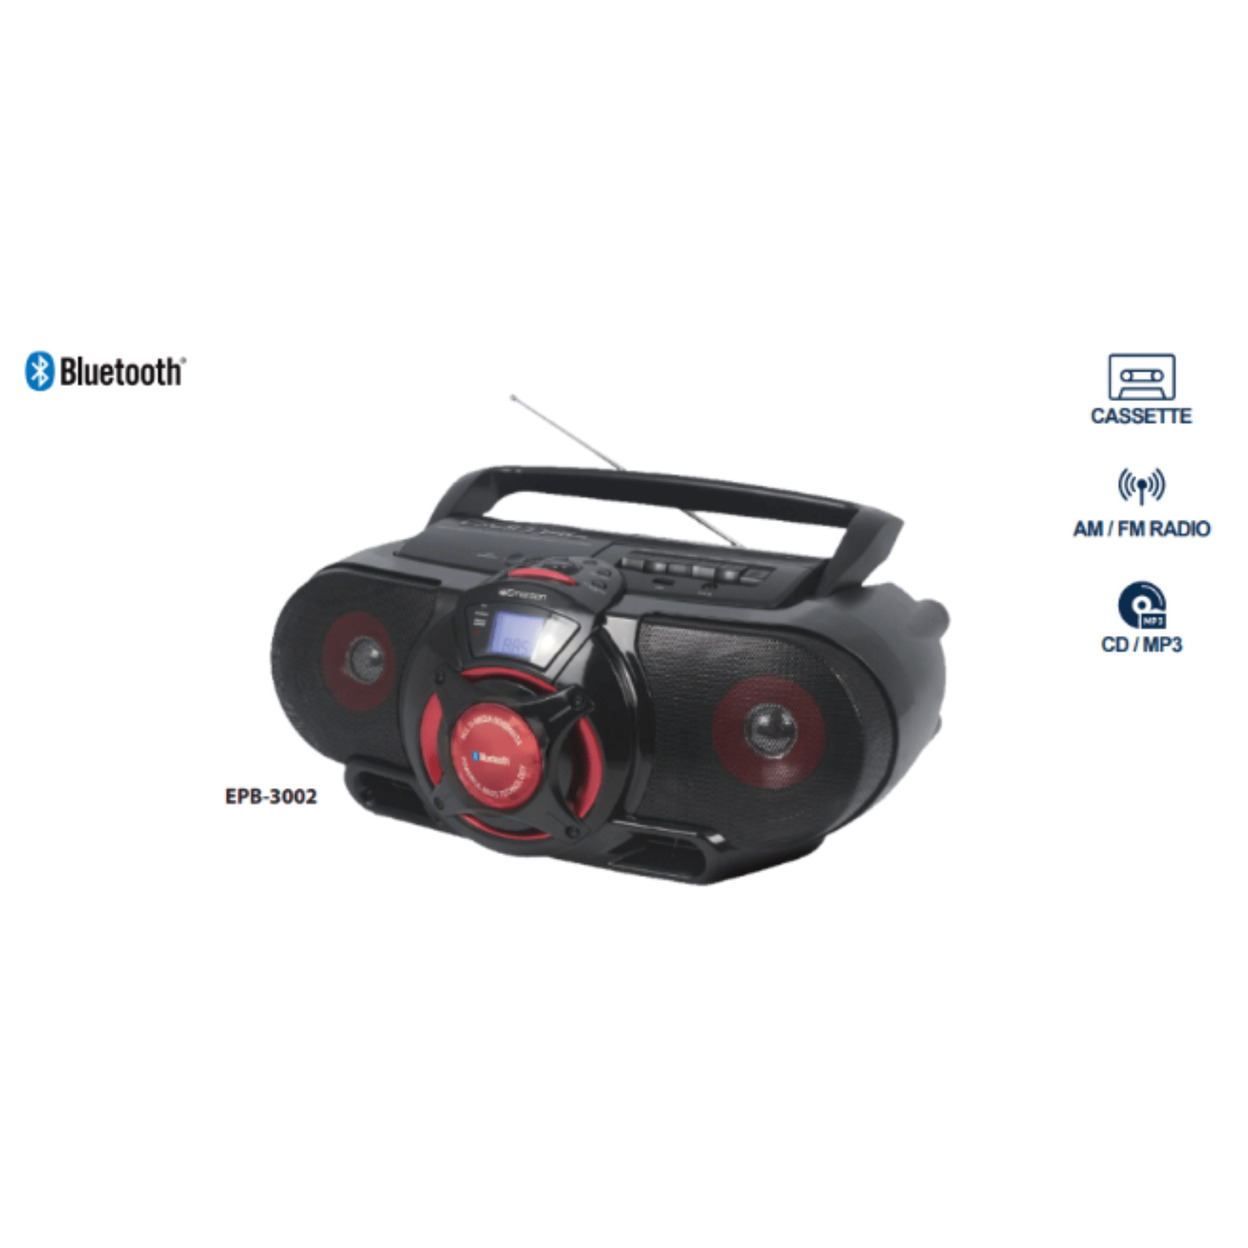 Emerson Portable Stereo Bluetooth Boombox